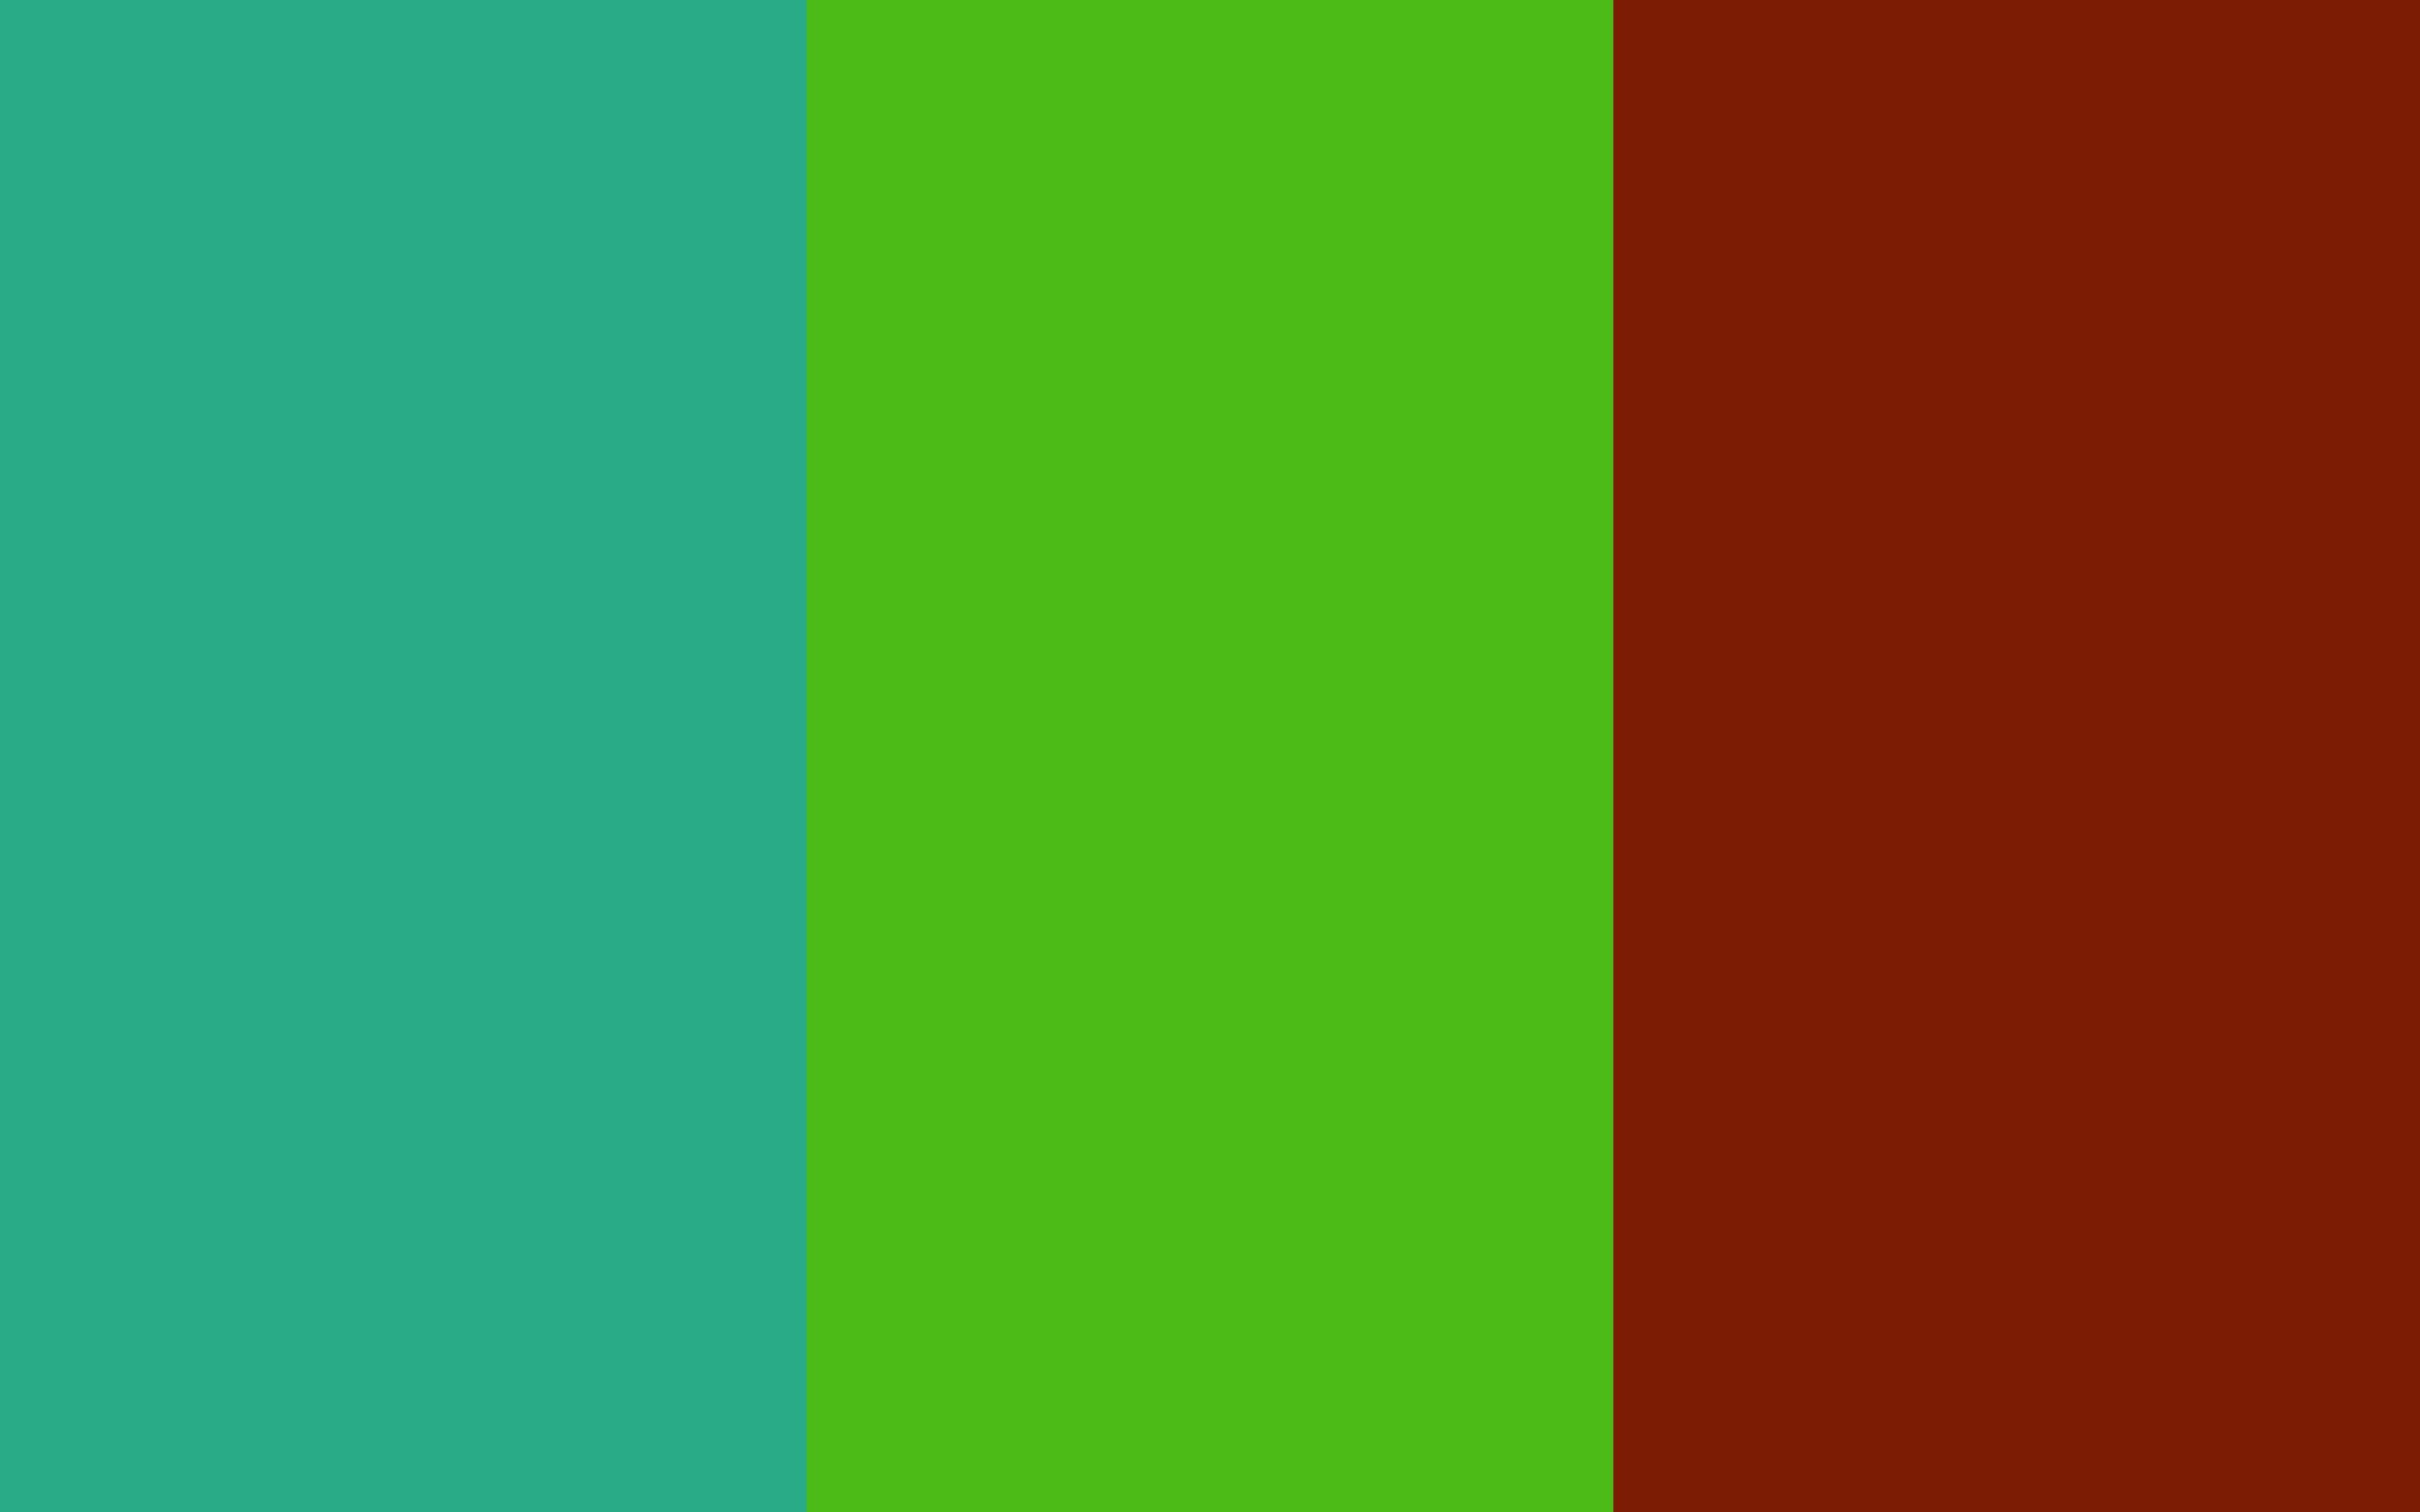 Free 2880x1800 resolution Jungle Green Kelly Green and Kenyan Copper 2880x1800